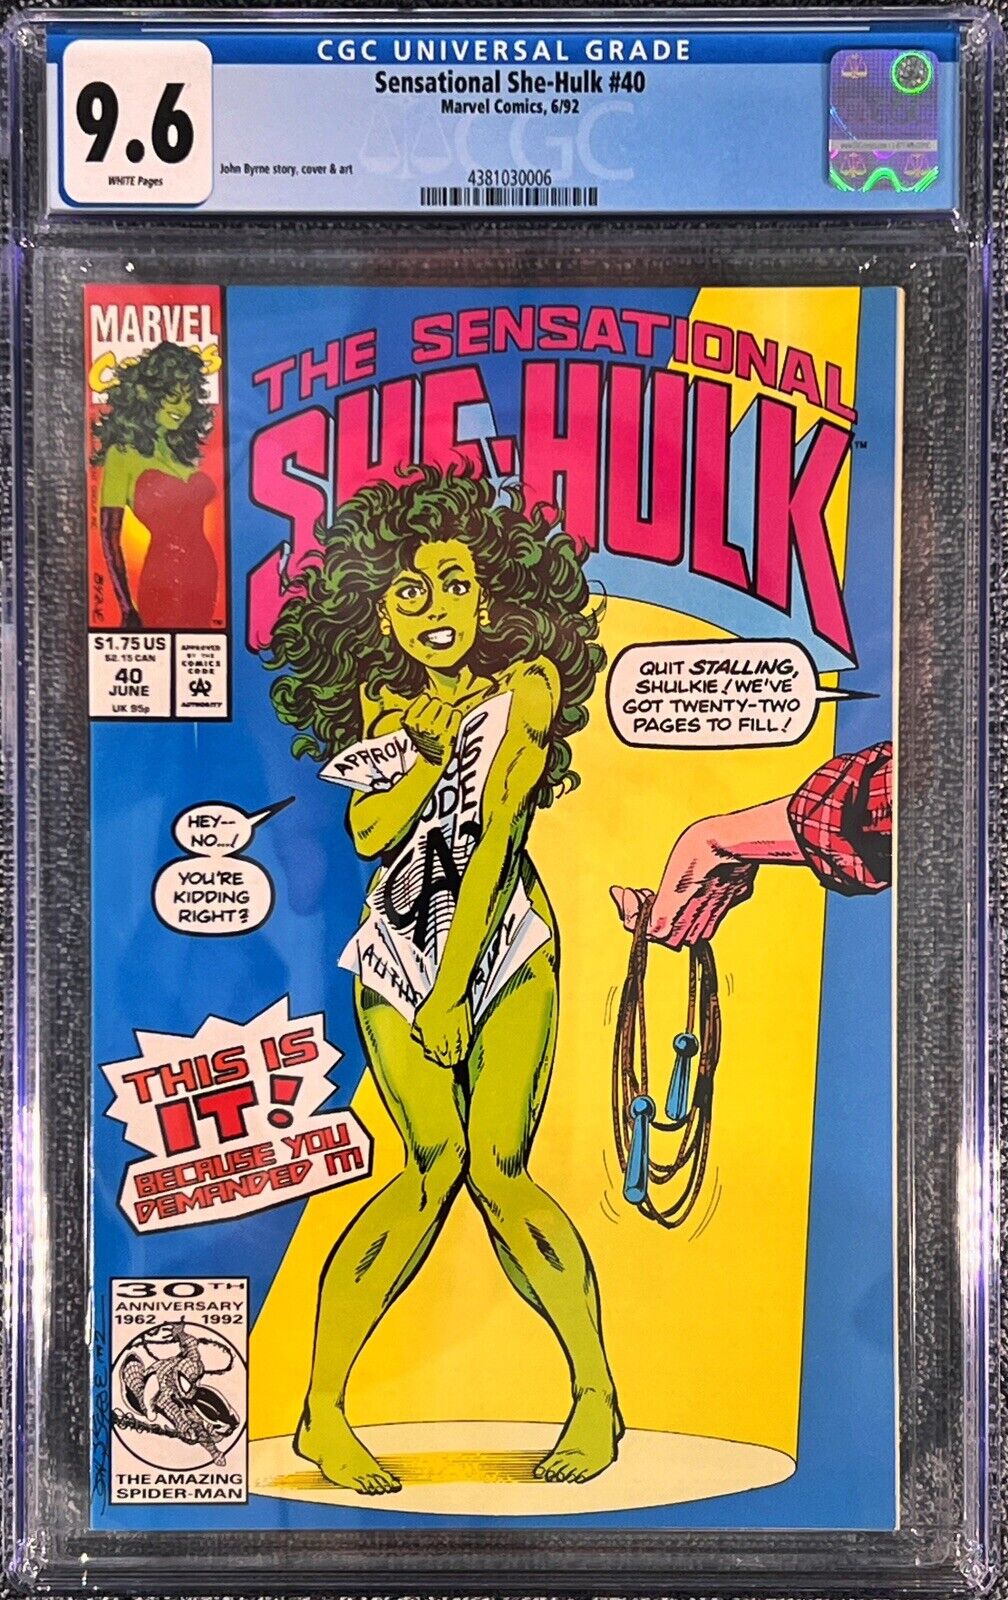 💥 Sensational She-Hulk # 40 1992 CGC 9.6 NM+ Controversial Jump Rope Issue 💥